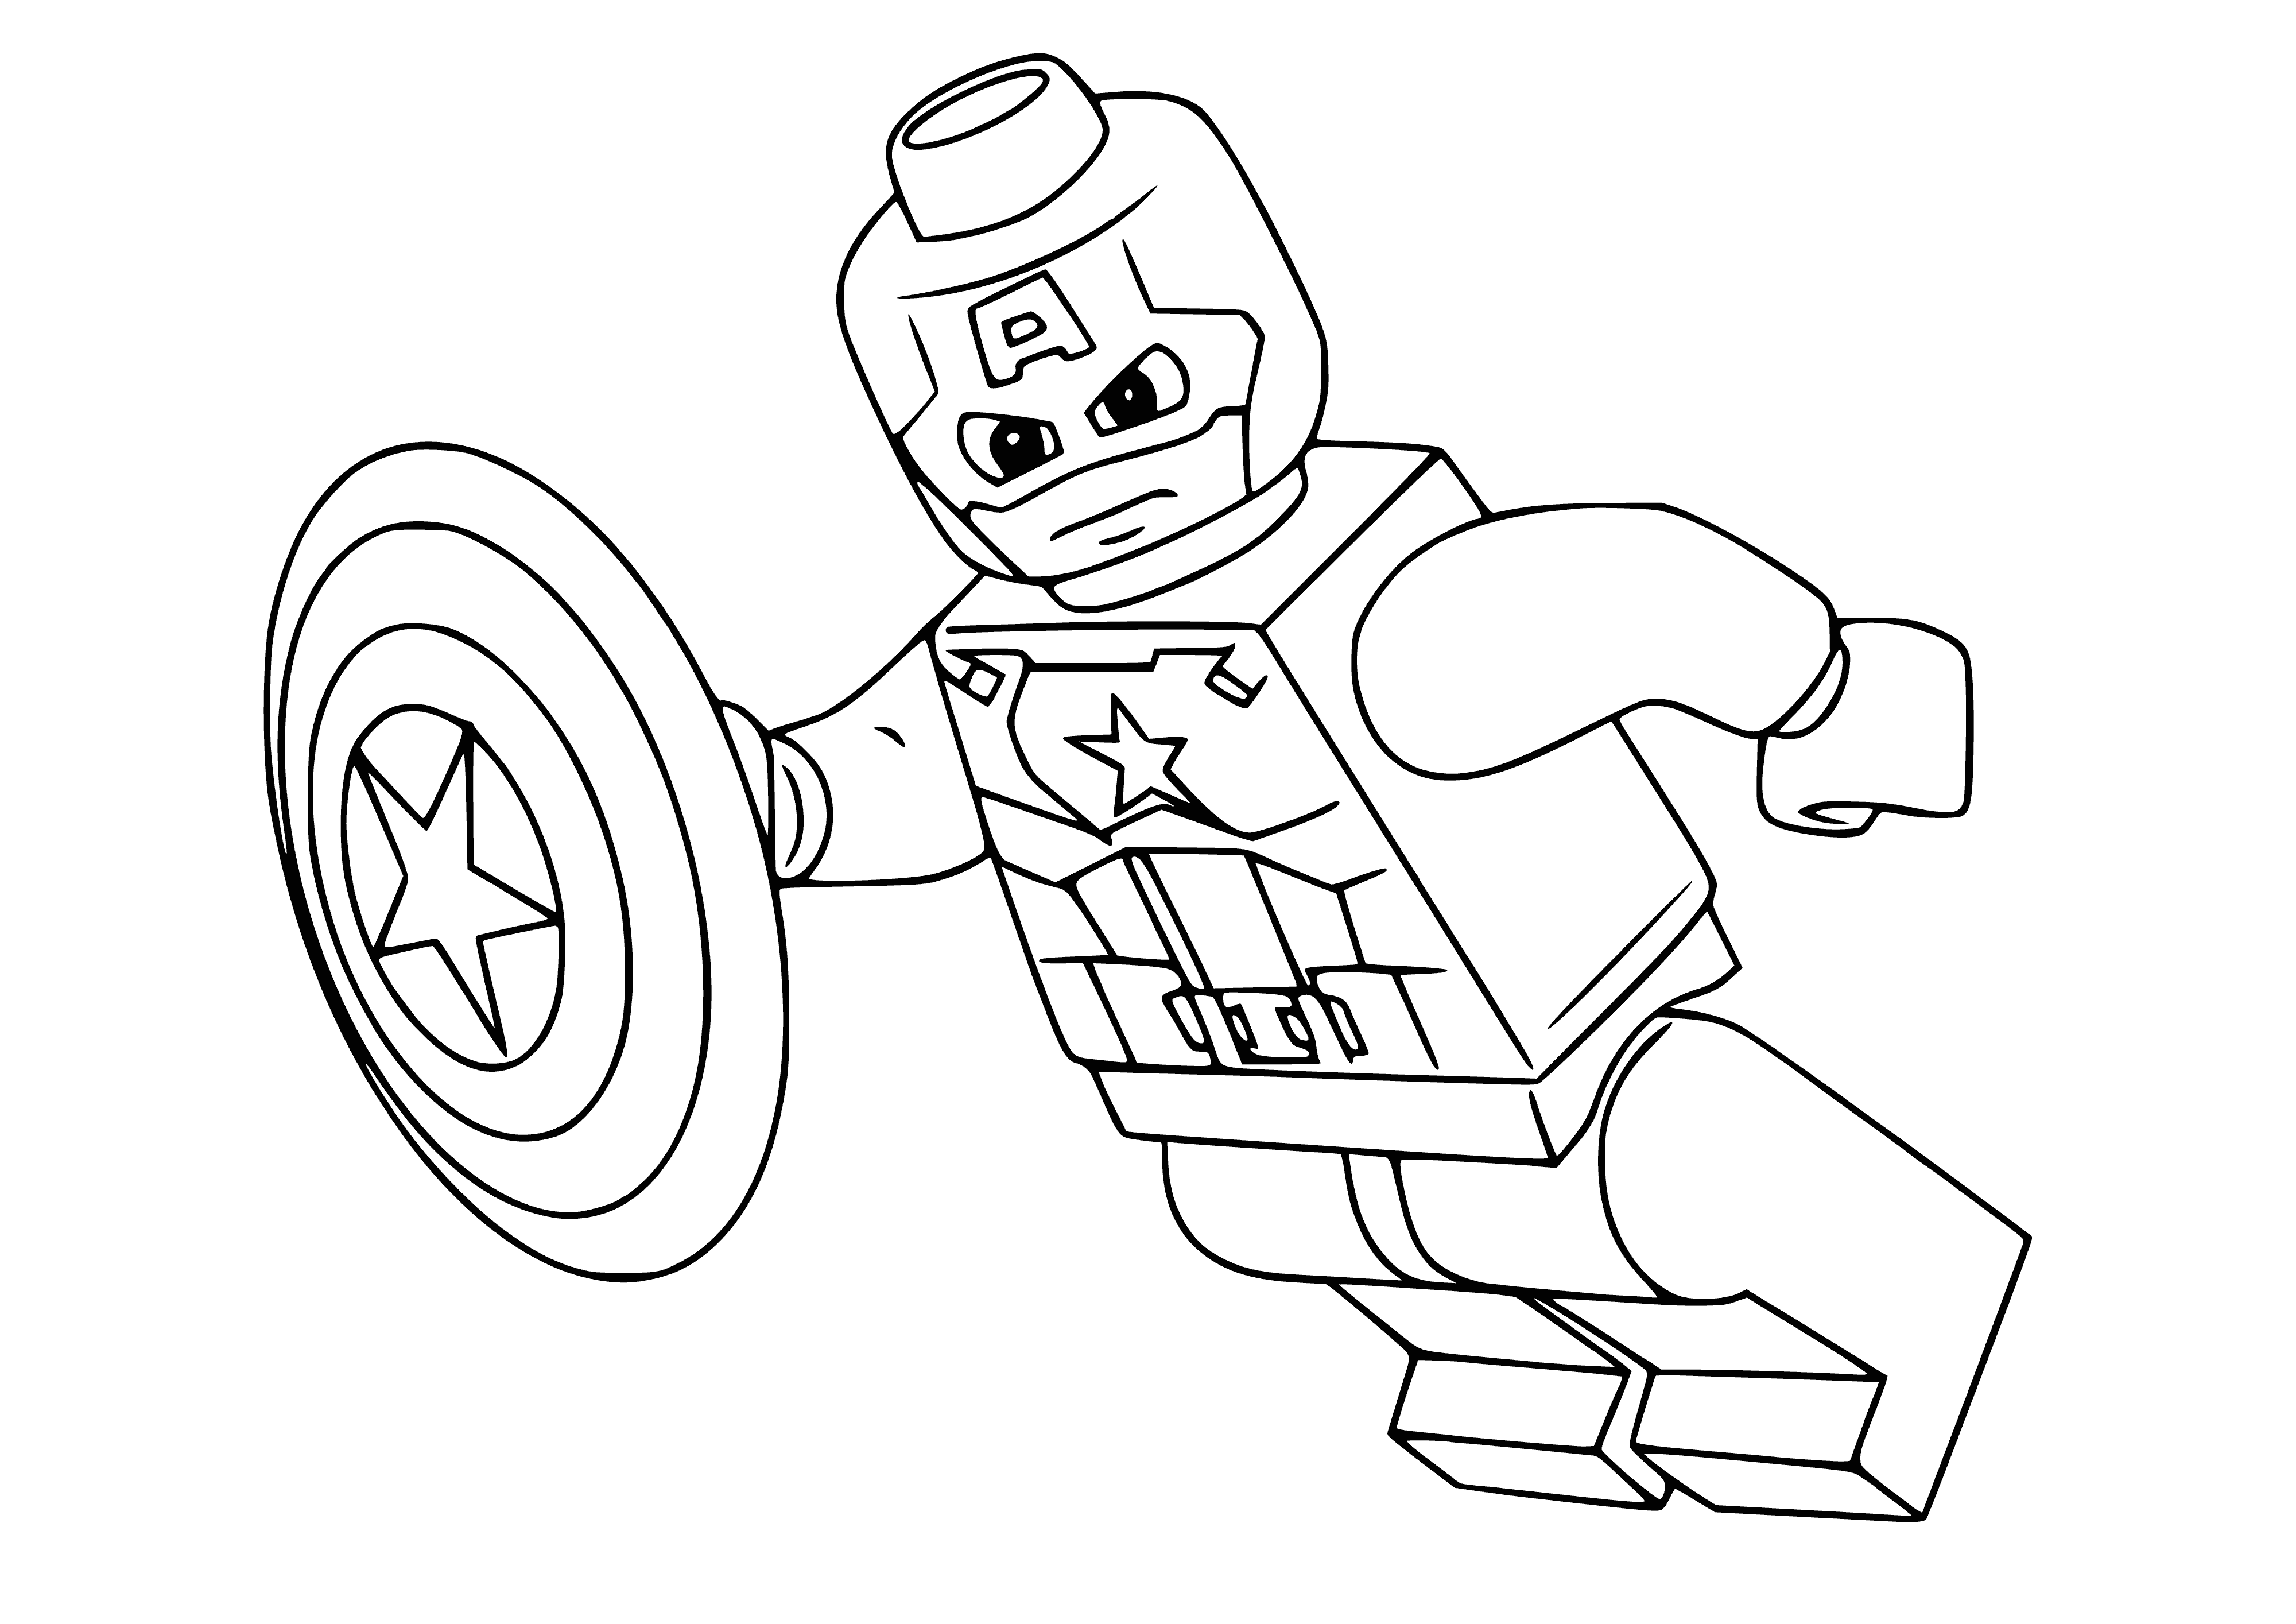 coloring page: Man in blue/white suit with large red "A" stands on Lego brick; has shield & dark hair/beard.